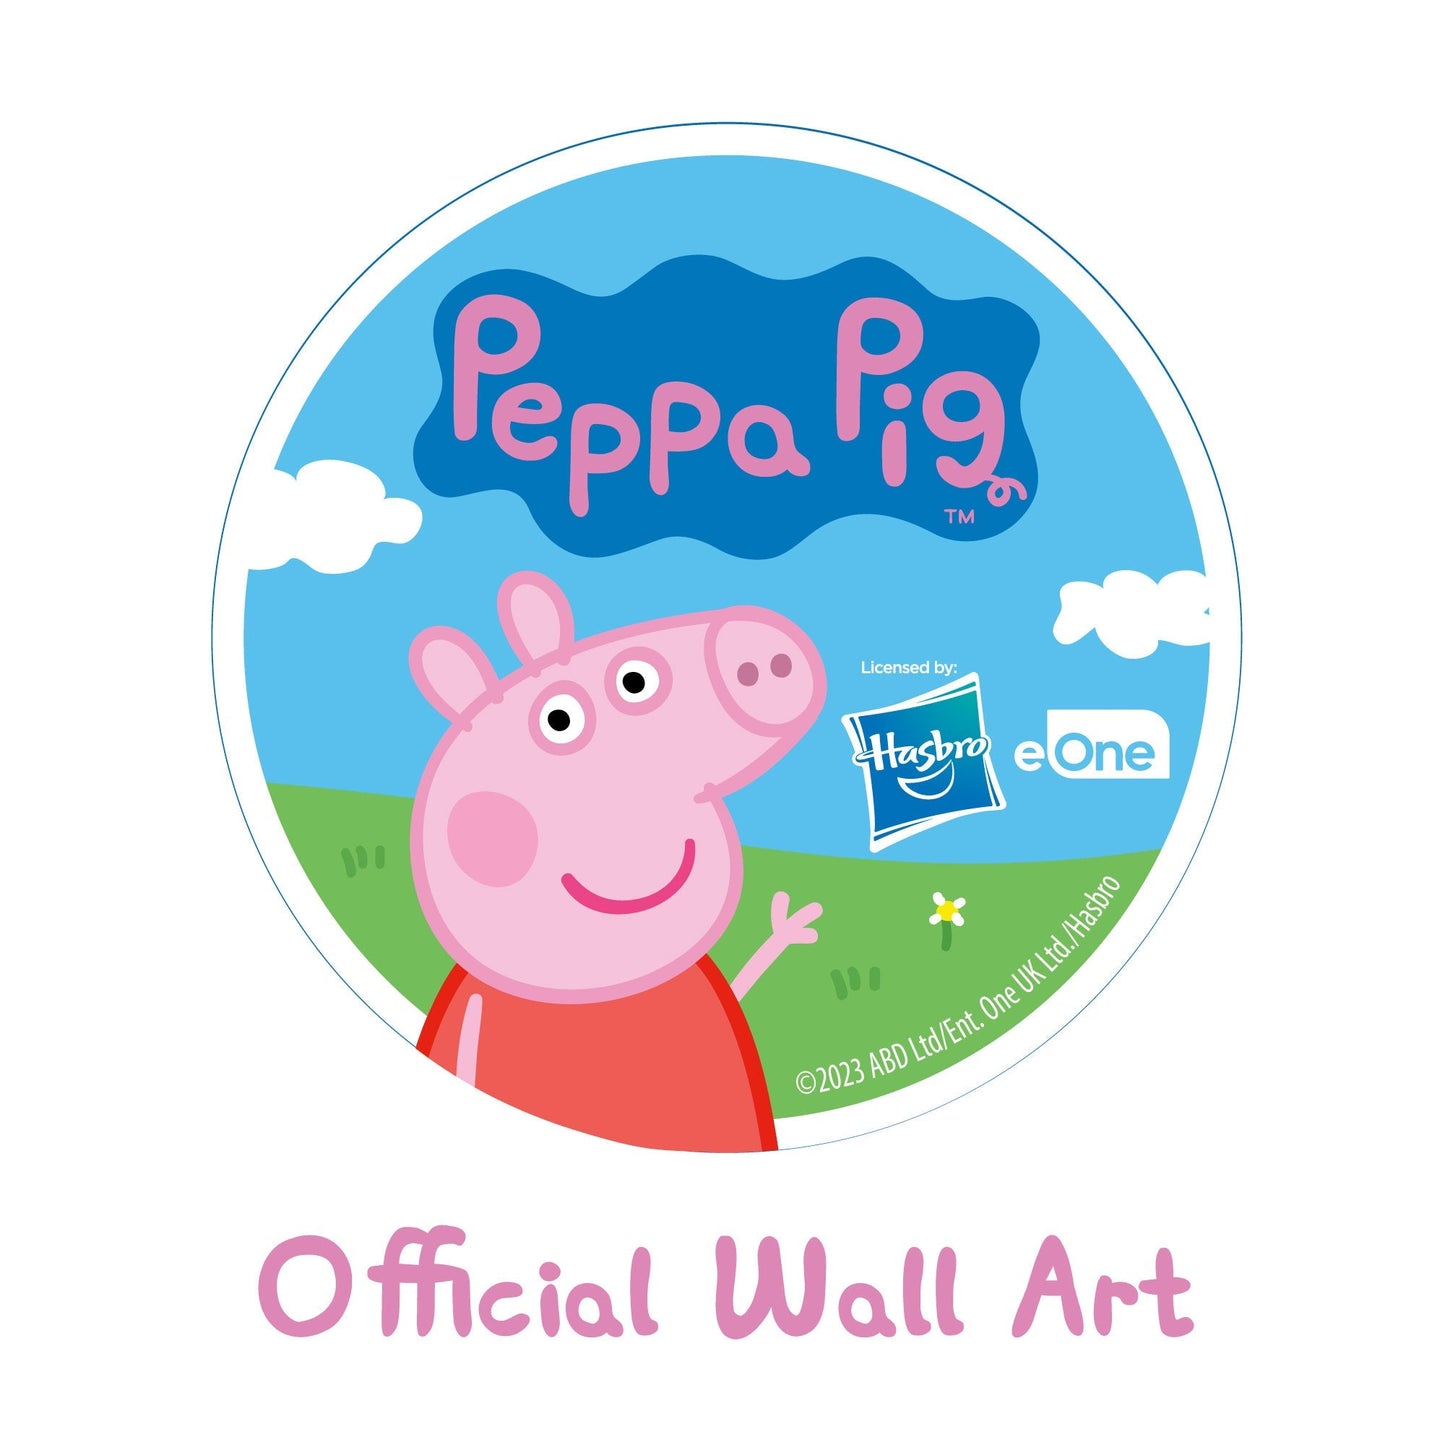 Peppa Pig Print - Peppa and Friends Group Smiling Poster Wall Art